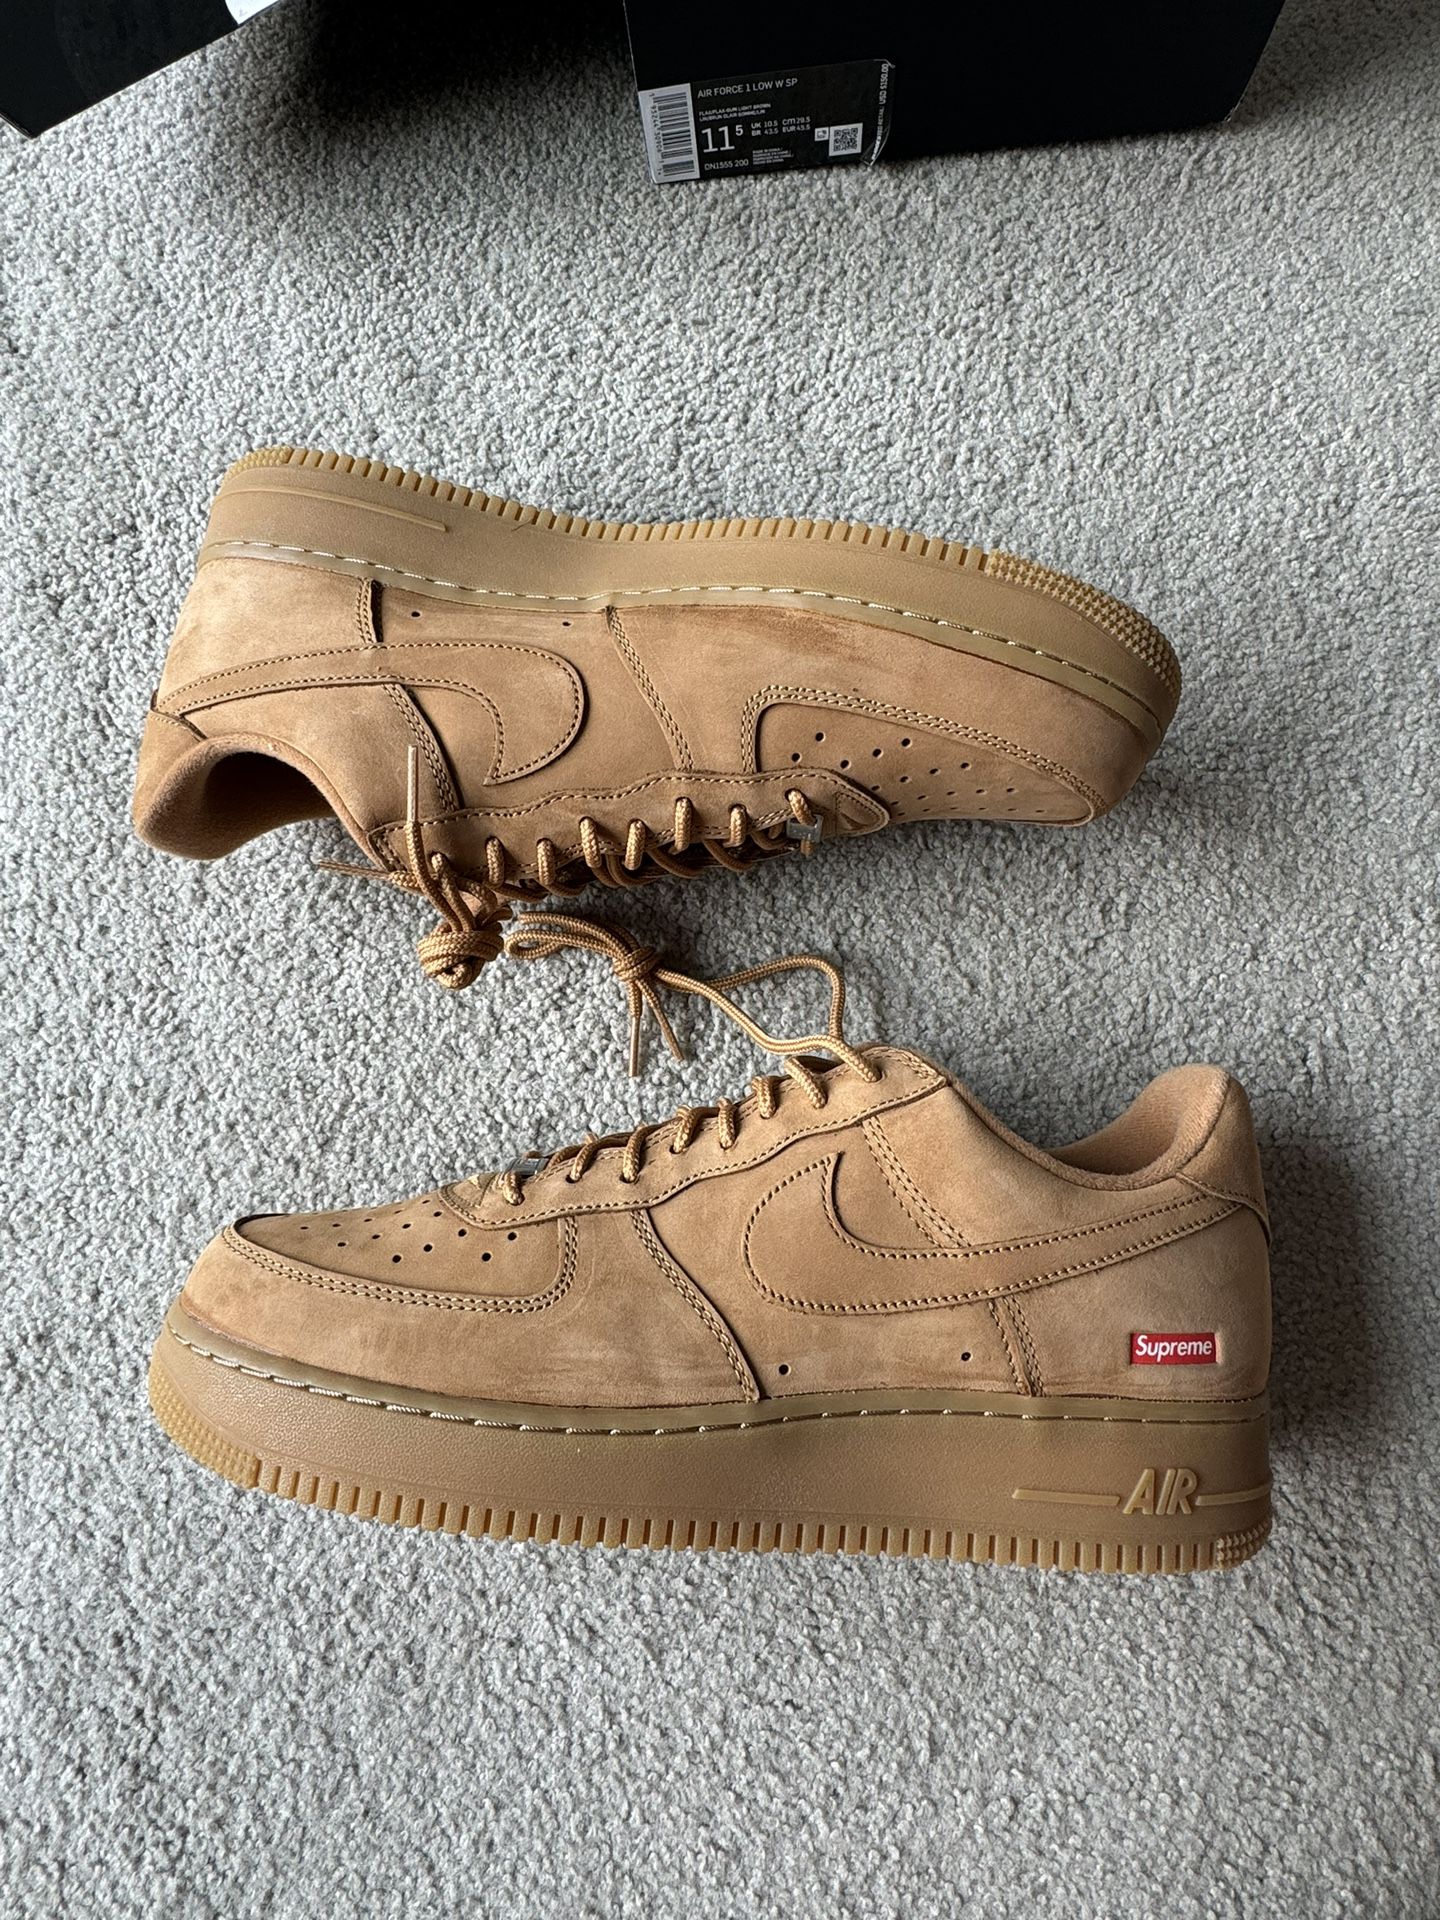 Nike x Supreme Air Force 1 Low Wheat Brand New Size 11.5